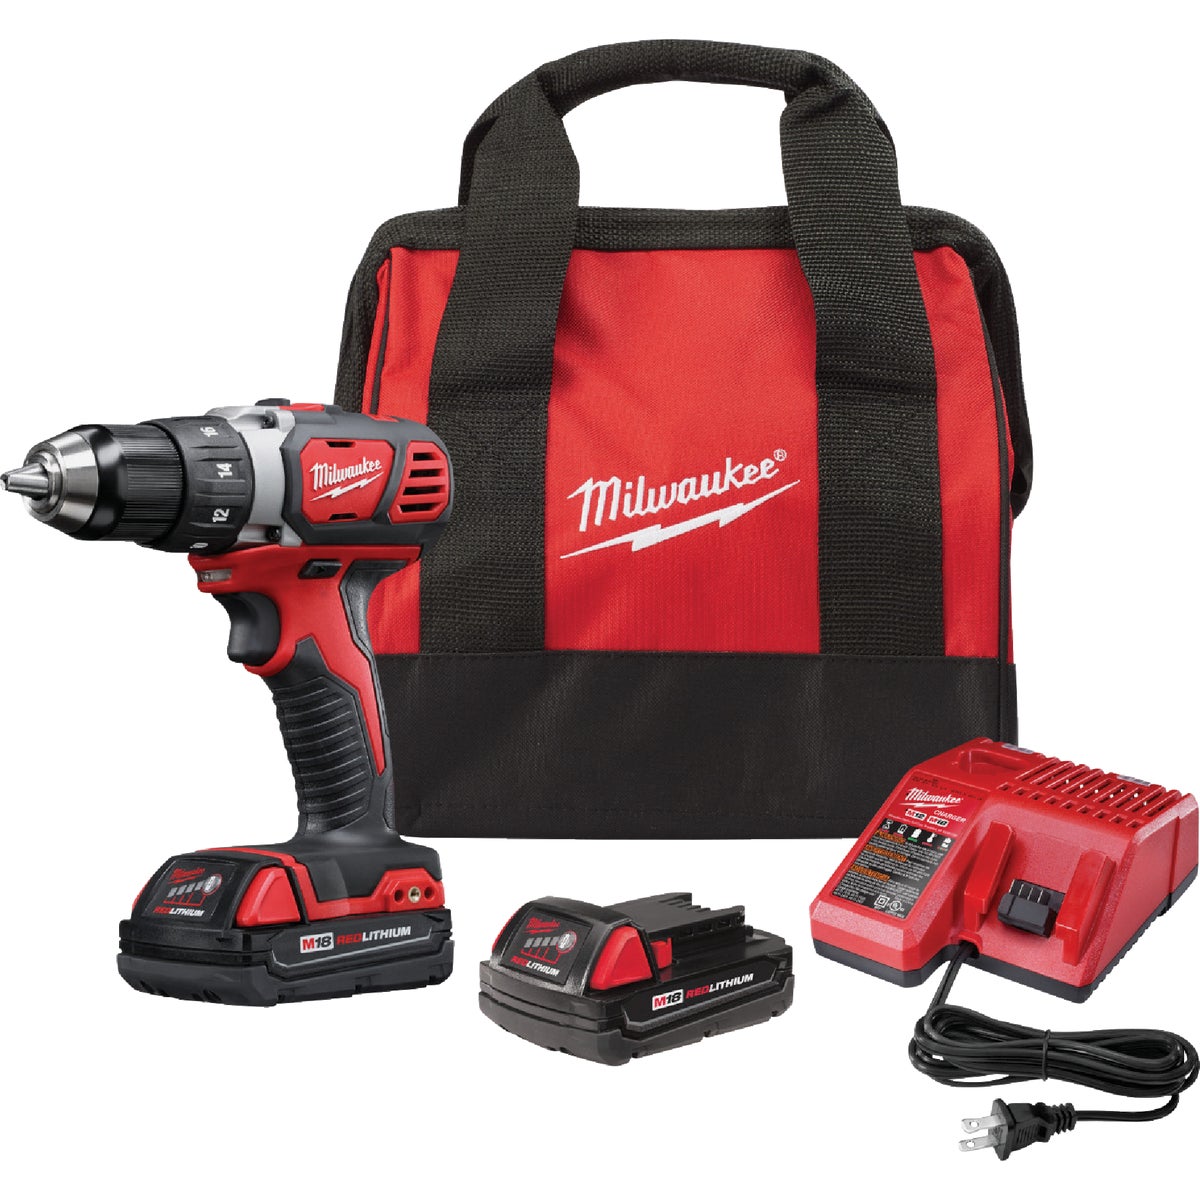 Milwaukee M18 1/2 In. Compact Cordless Drill Kit